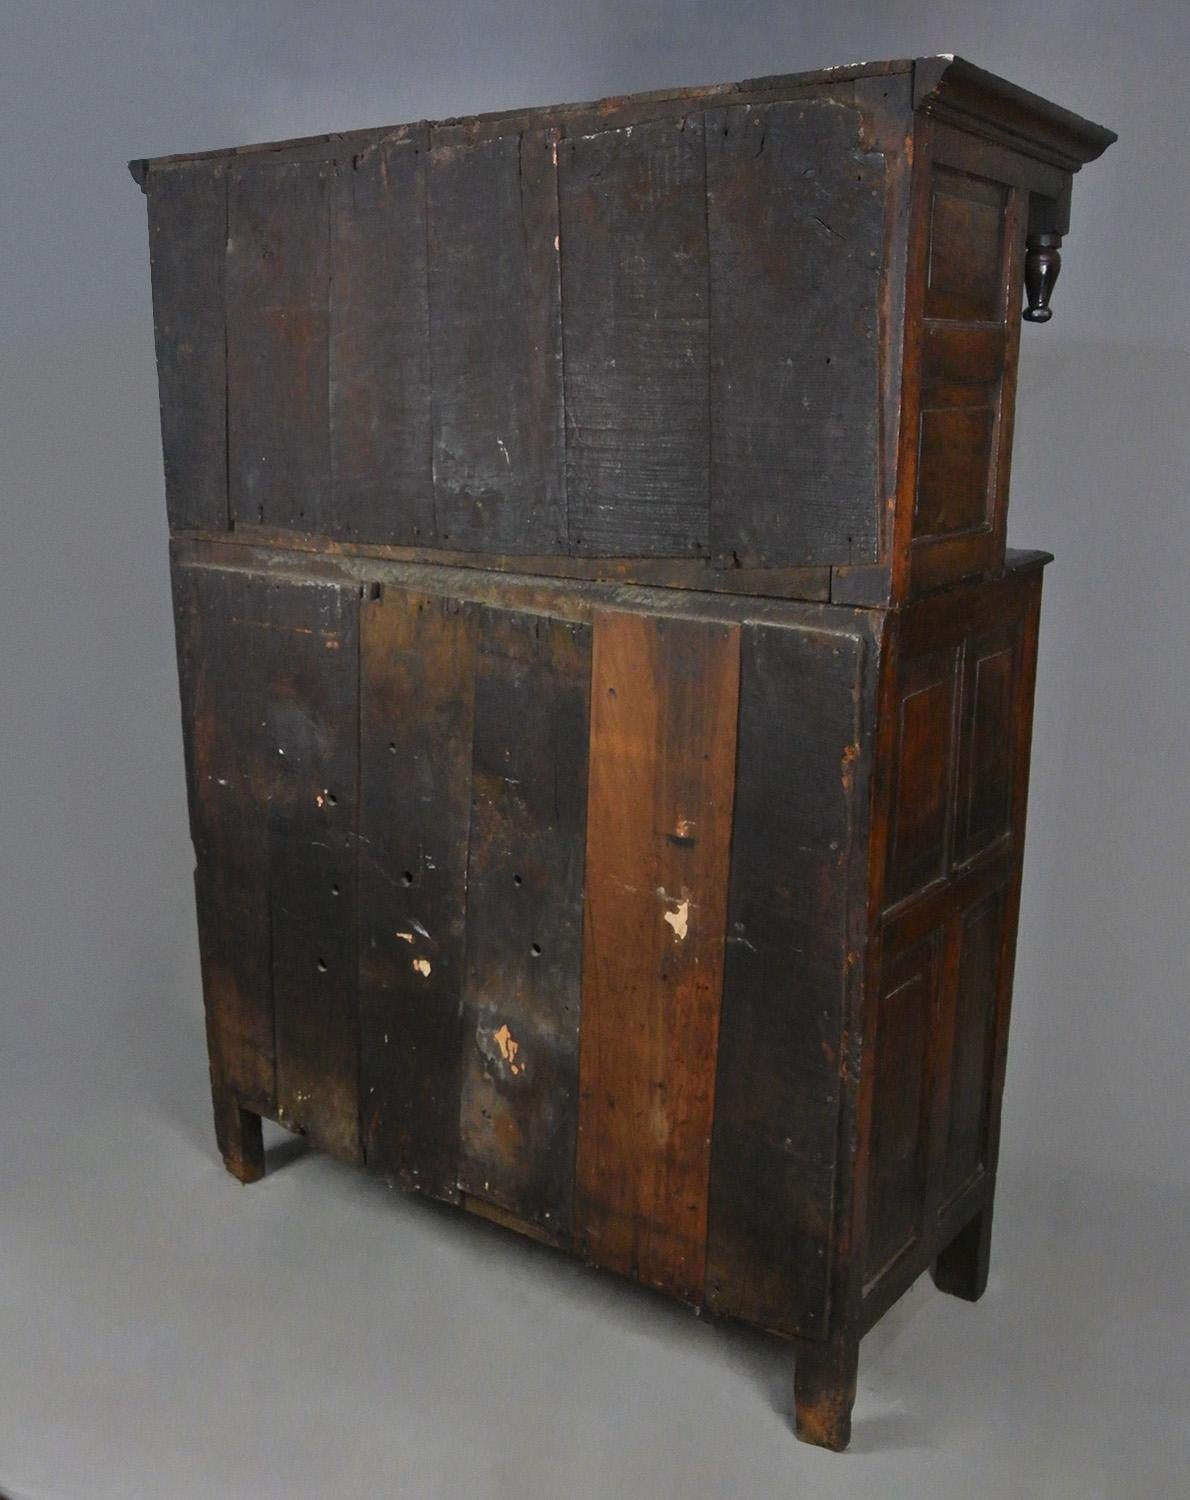 Exceptional Dated English Oak Press Cupboard with Secrets - 1723 For Sale 5